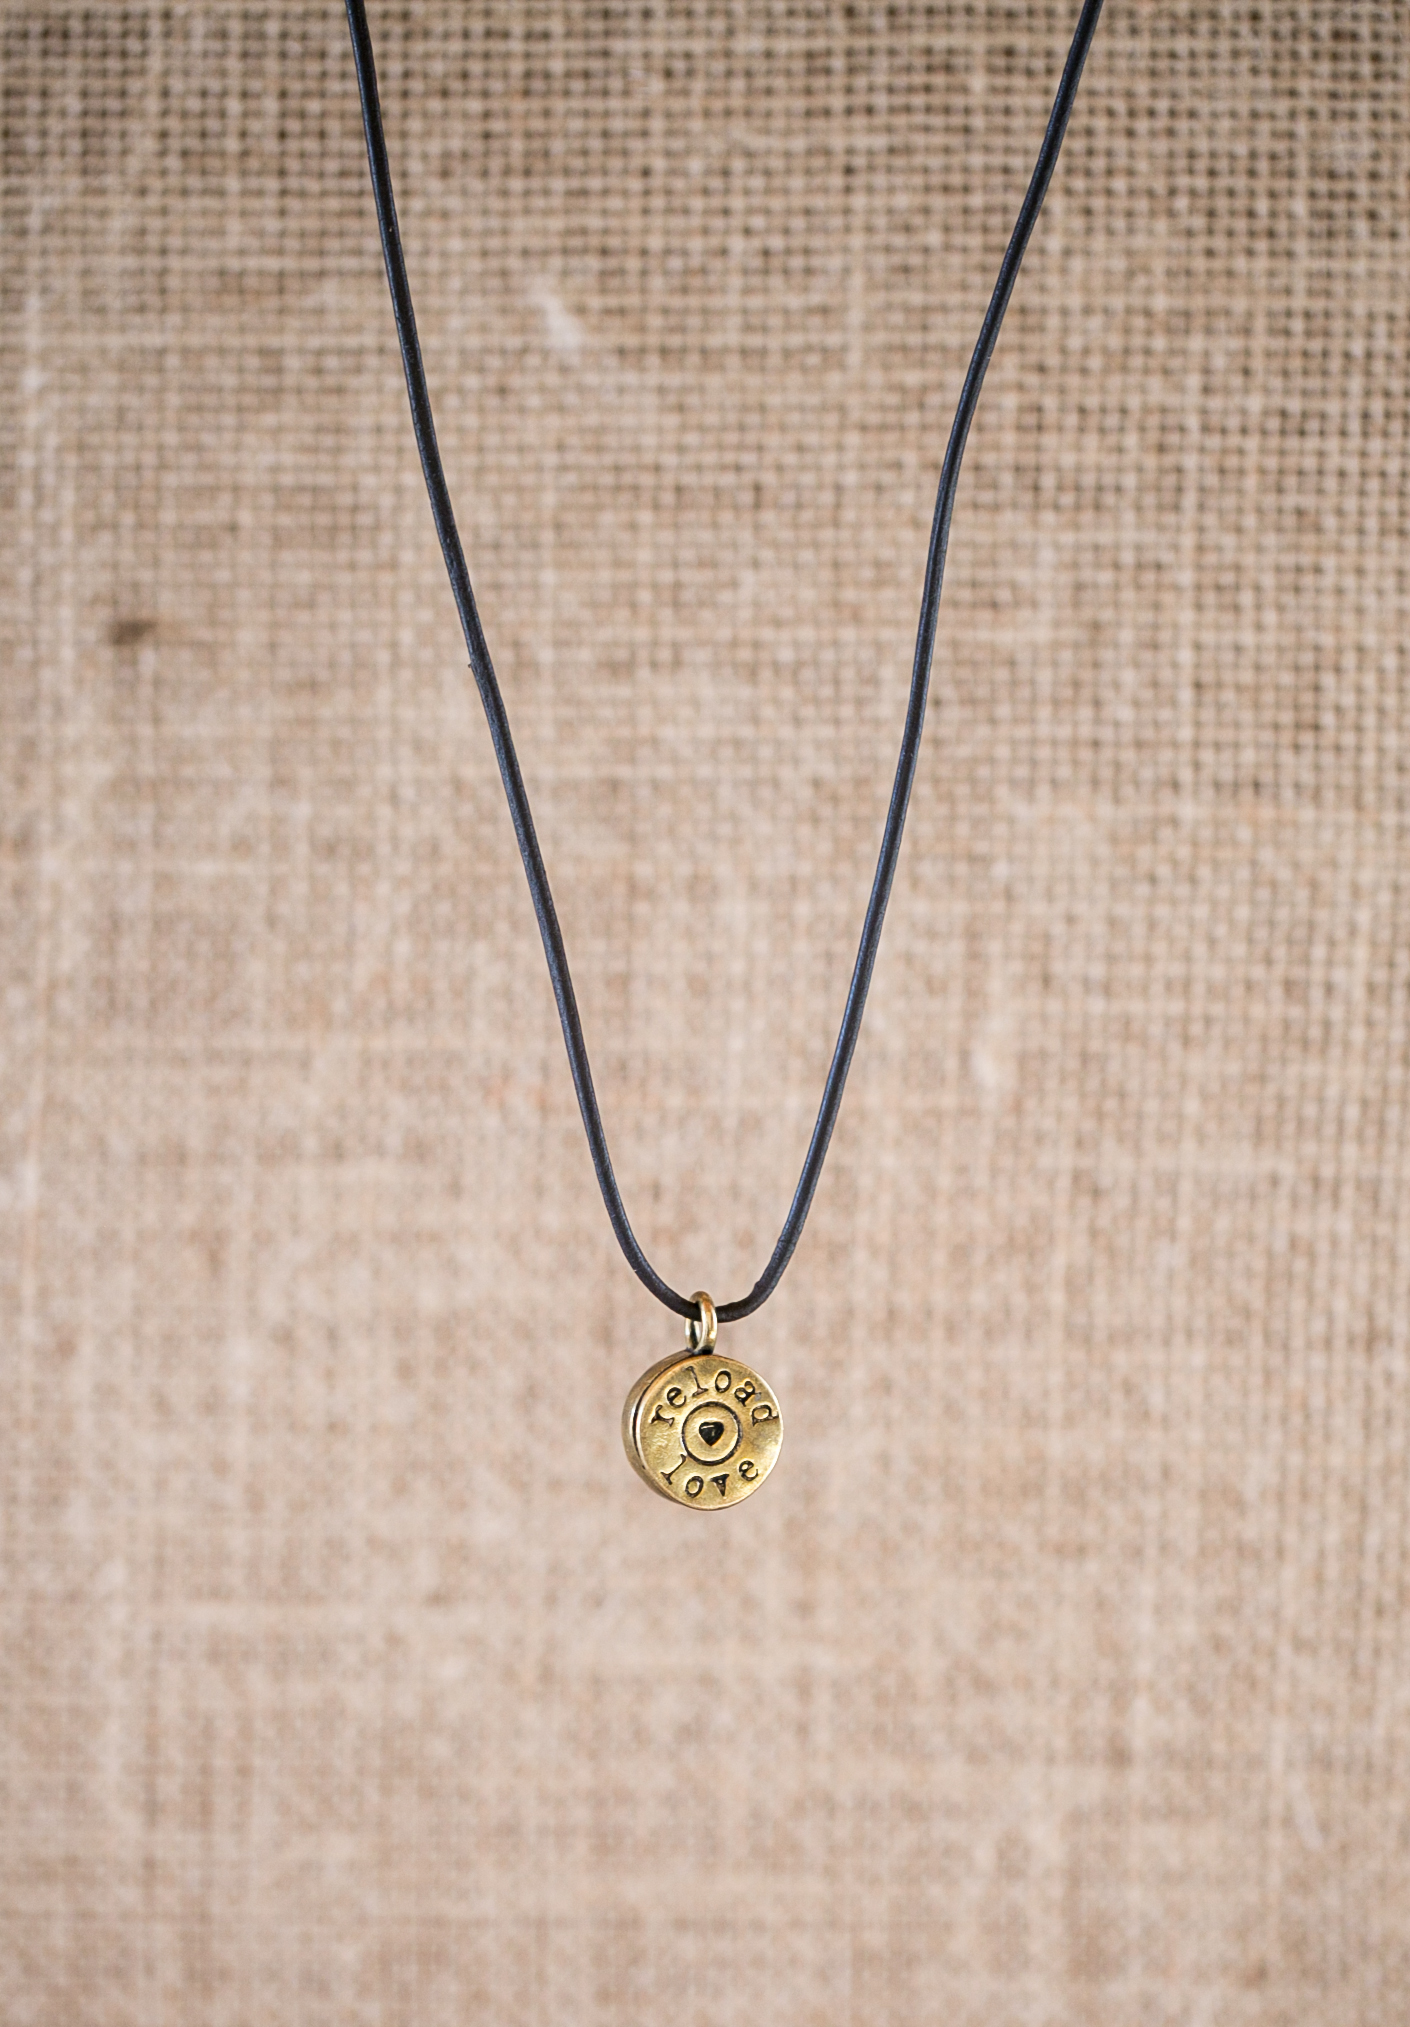 Round Brass Pendant Necklace w Leather Strands